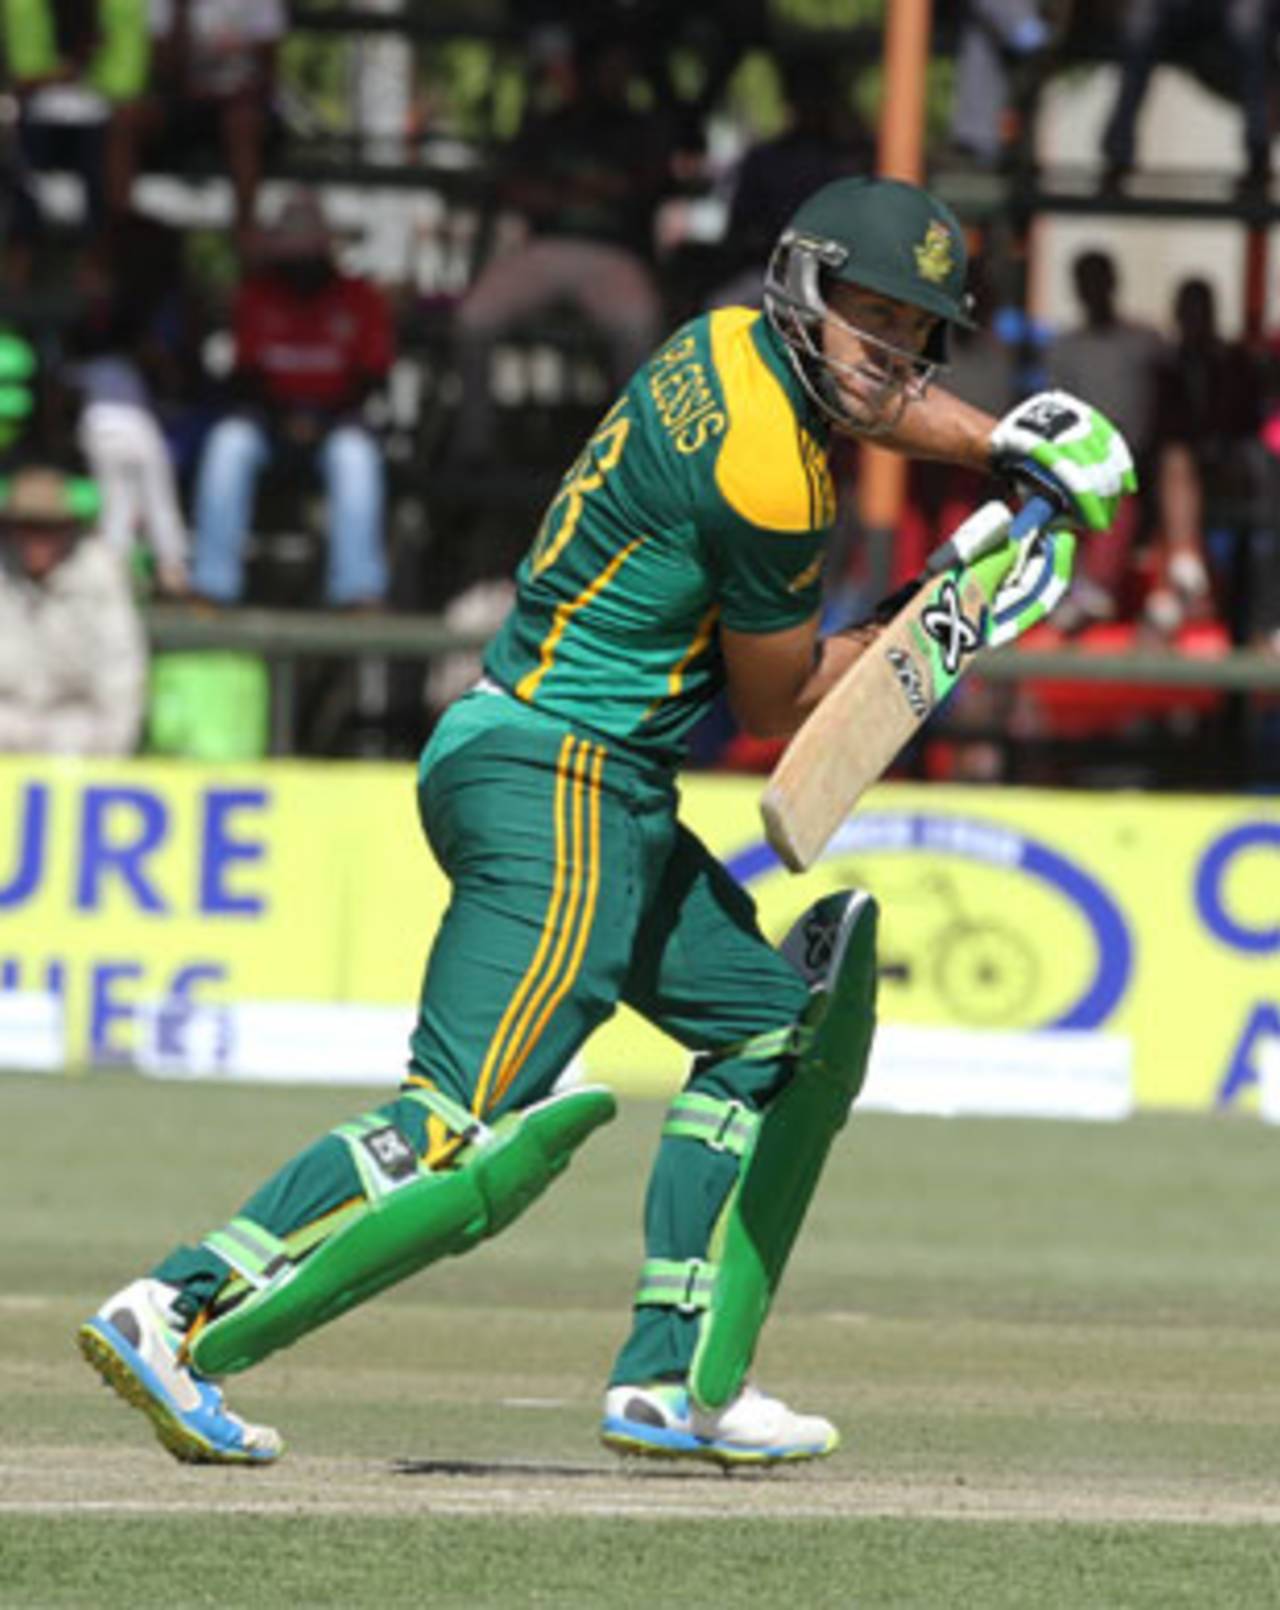 Faf du Plessis has started producing solid innings at No. 3, just like his predecessor Jacques Kallis did&nbsp;&nbsp;&bull;&nbsp;&nbsp;Associated Press